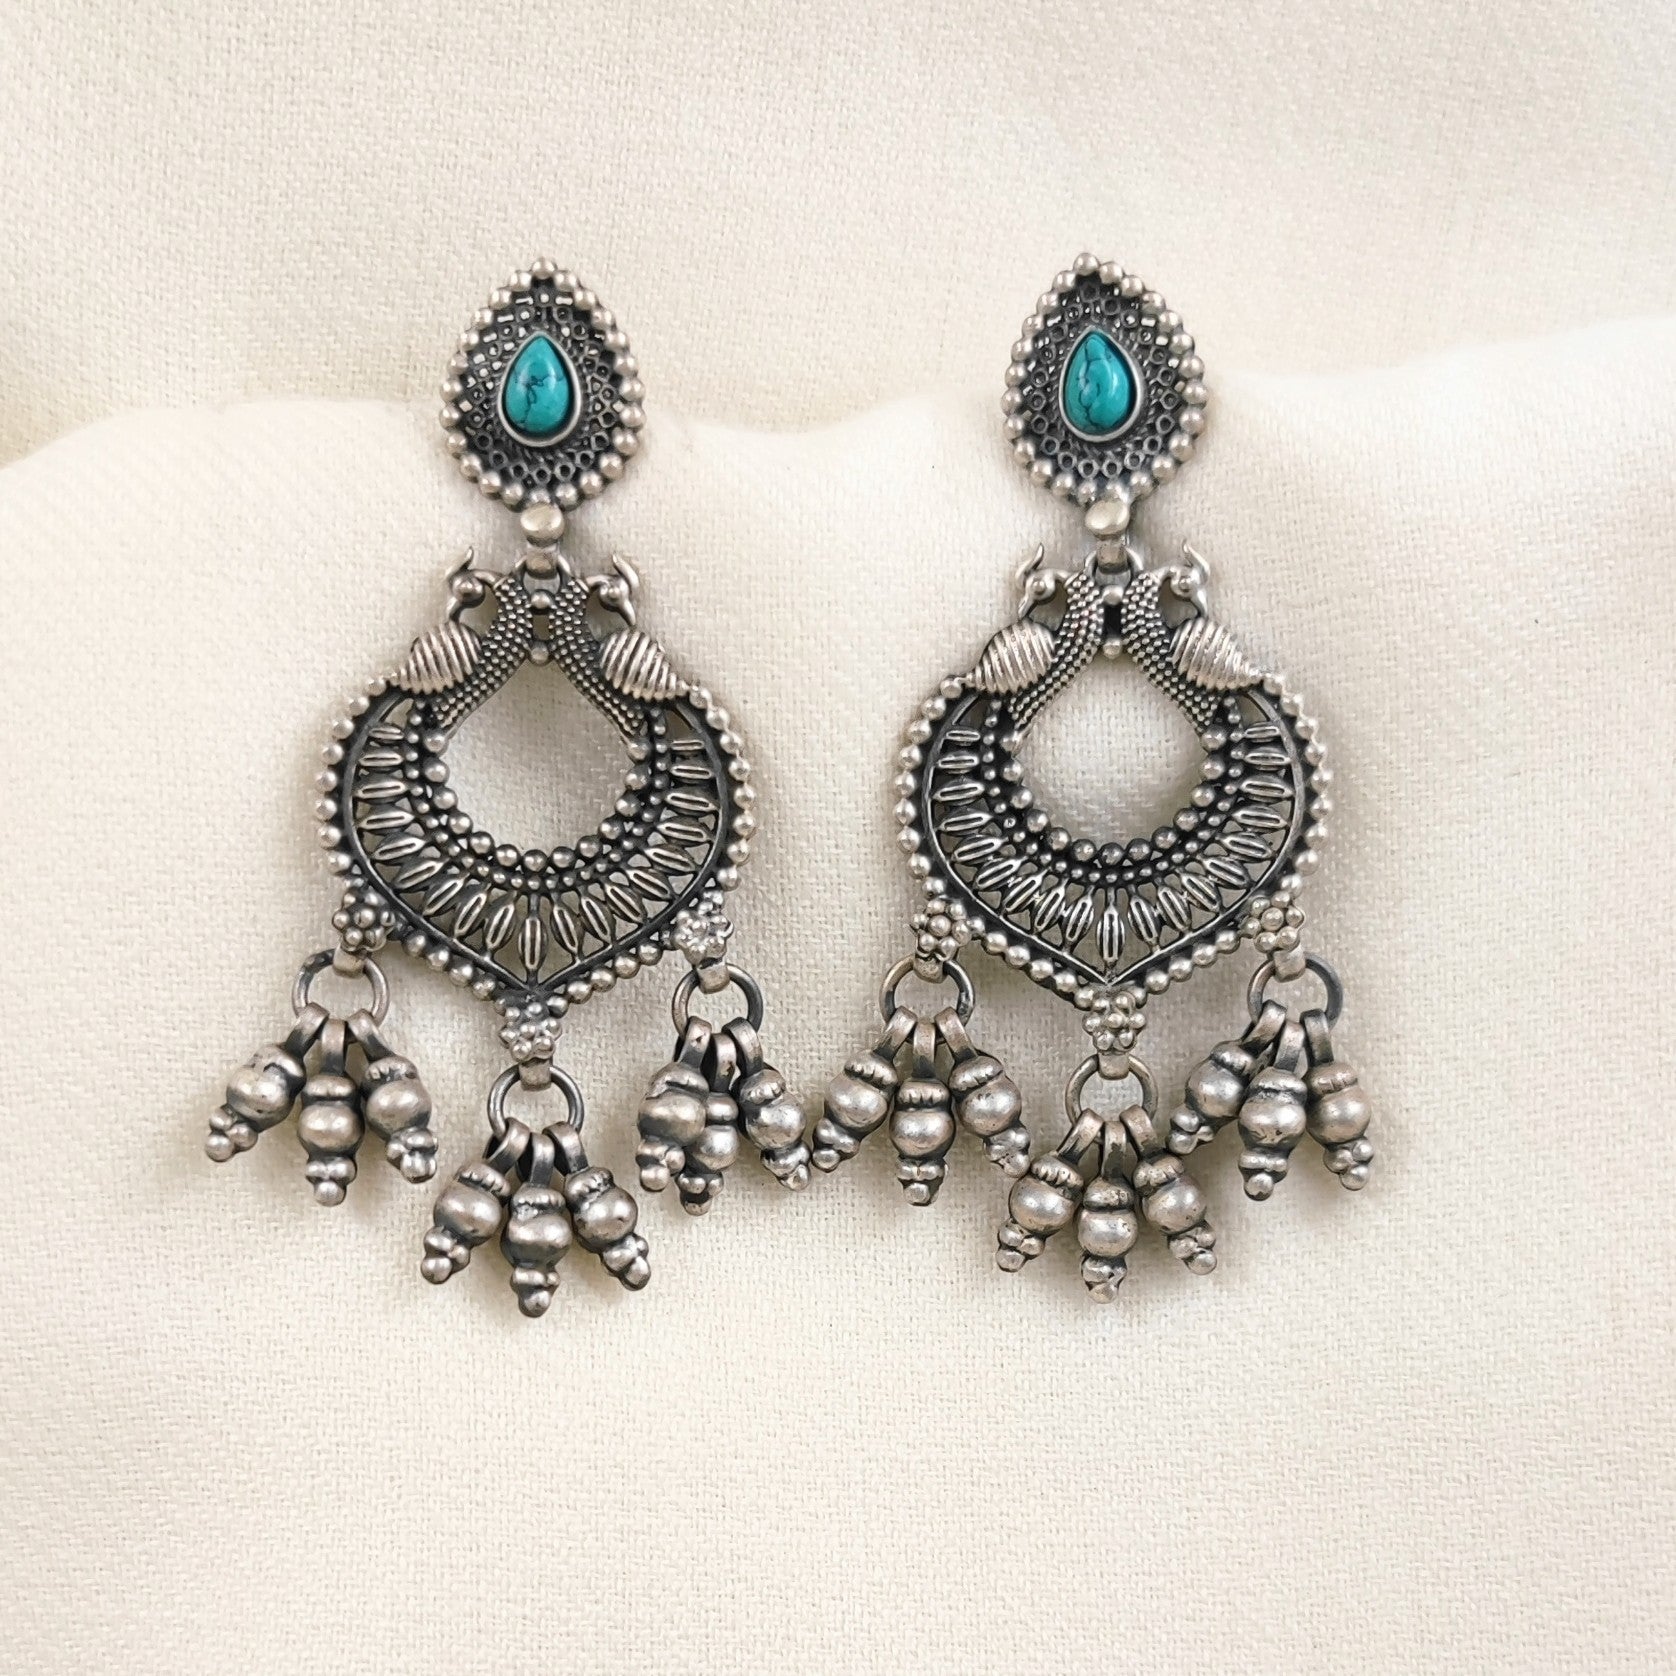 Silver Jewelry Earrings by Jauhri 92.5 Silver - Turquoise Peacock Earrings